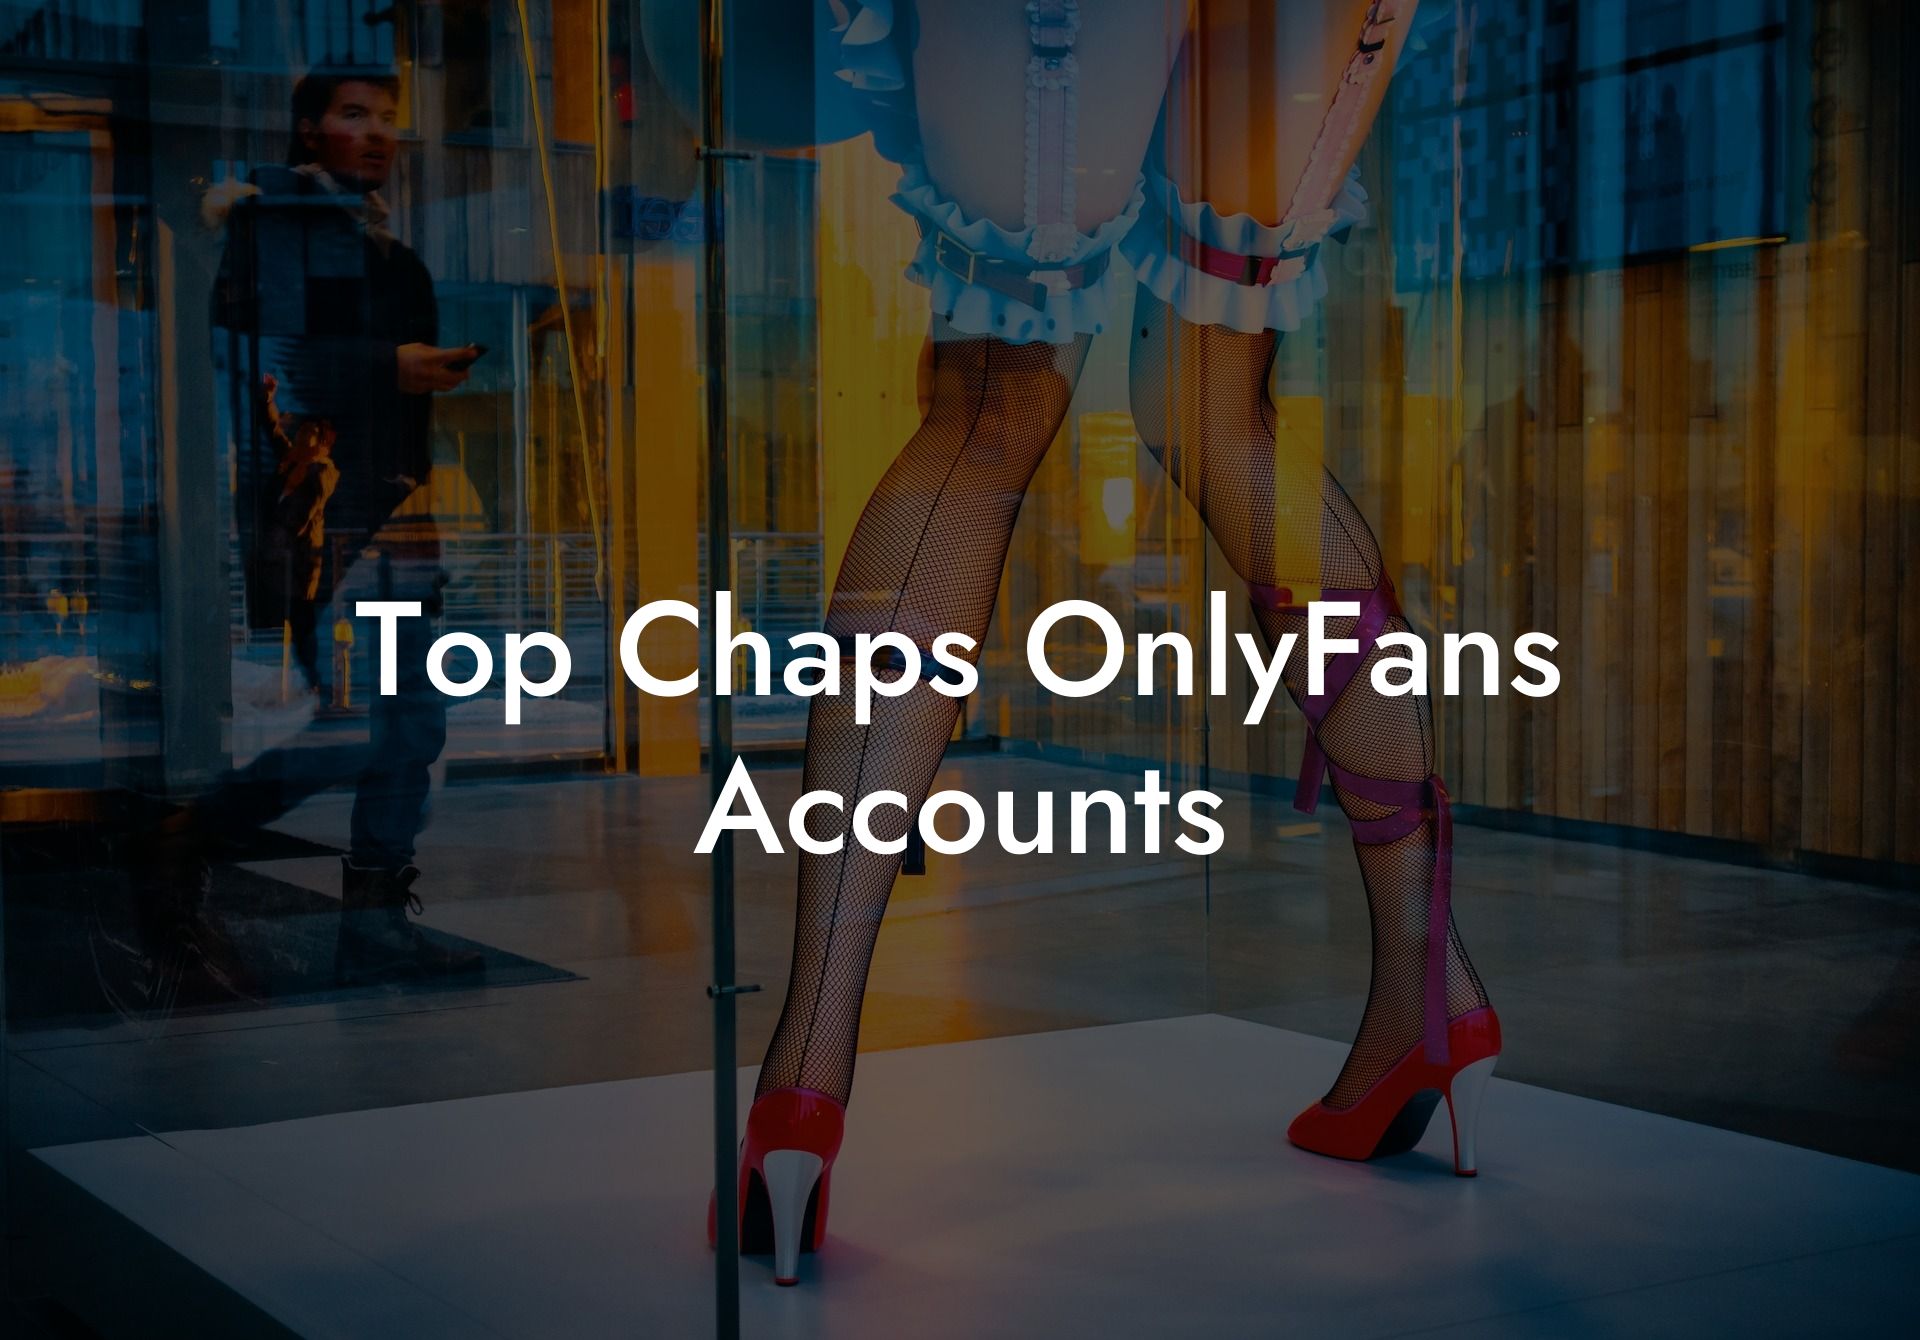 Top Chaps OnlyFans Accounts